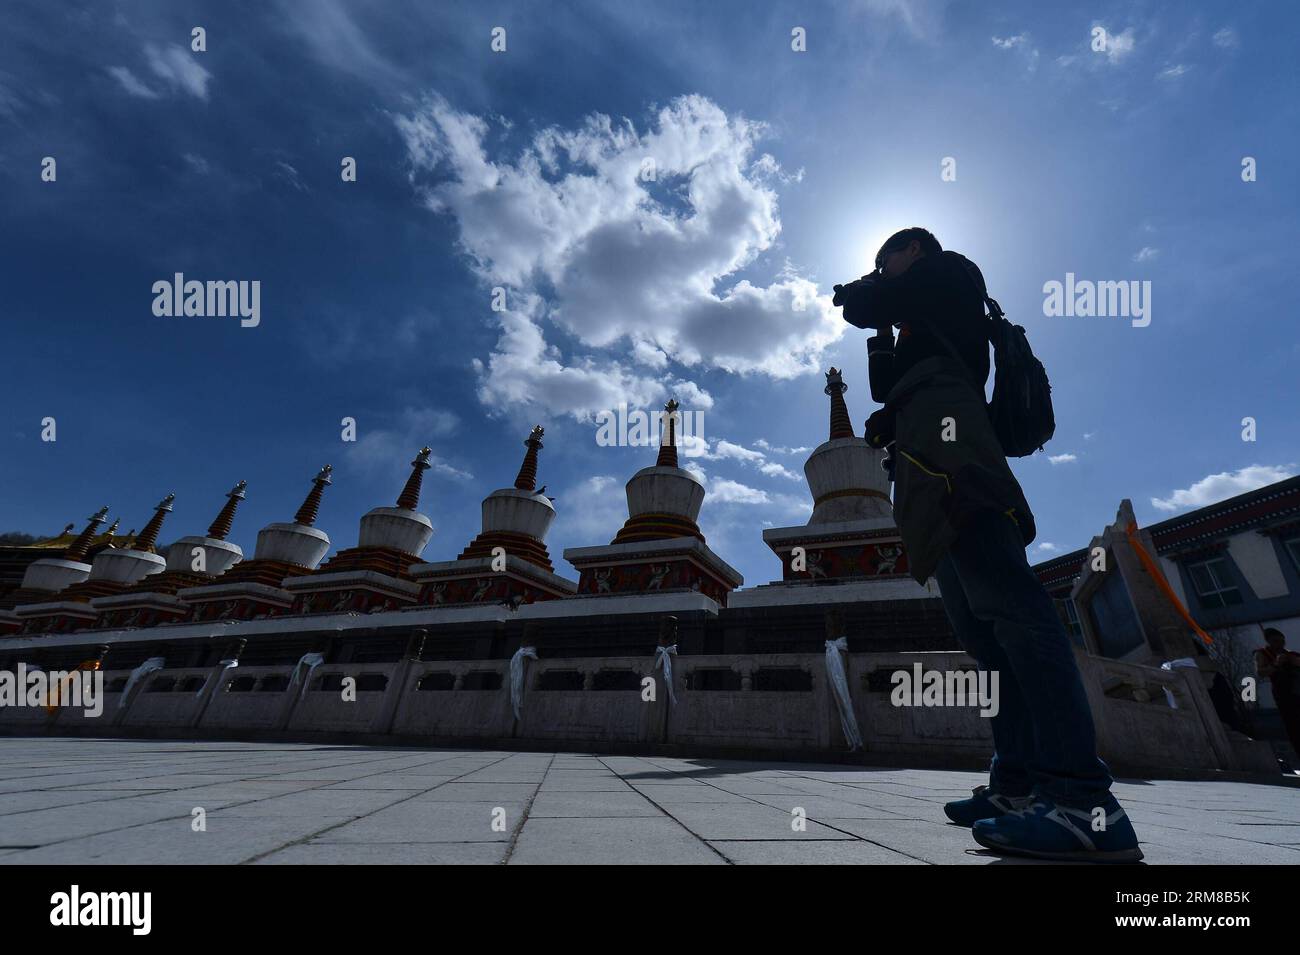 (140406) -- HUANGZHONG COUNTY, April 6, 2014 (Xinhua) -- A tourist taks photos in the Kumbum Monastery in Huangzhong County of Xining, capital of northwest China s Qinghai Province, April 6, 2014. The Kumbum Monastery is a main destination for Tibetan Buddhist pilgrims. It is also a major tourist attraction in Qinghai, which features splendid religious murals, Thangka appliques and butter sculptures. (Xinhua/Wu Gang) (lmm) CHINA-QINGHAI-KUMBUM MONASTERY-TOURISM (CN) PUBLICATIONxNOTxINxCHN   Huang Zhong County April 6 2014 XINHUA a Tourist taks Photos in The Kumbum monastery in Huang Zhong Coun Stock Photo